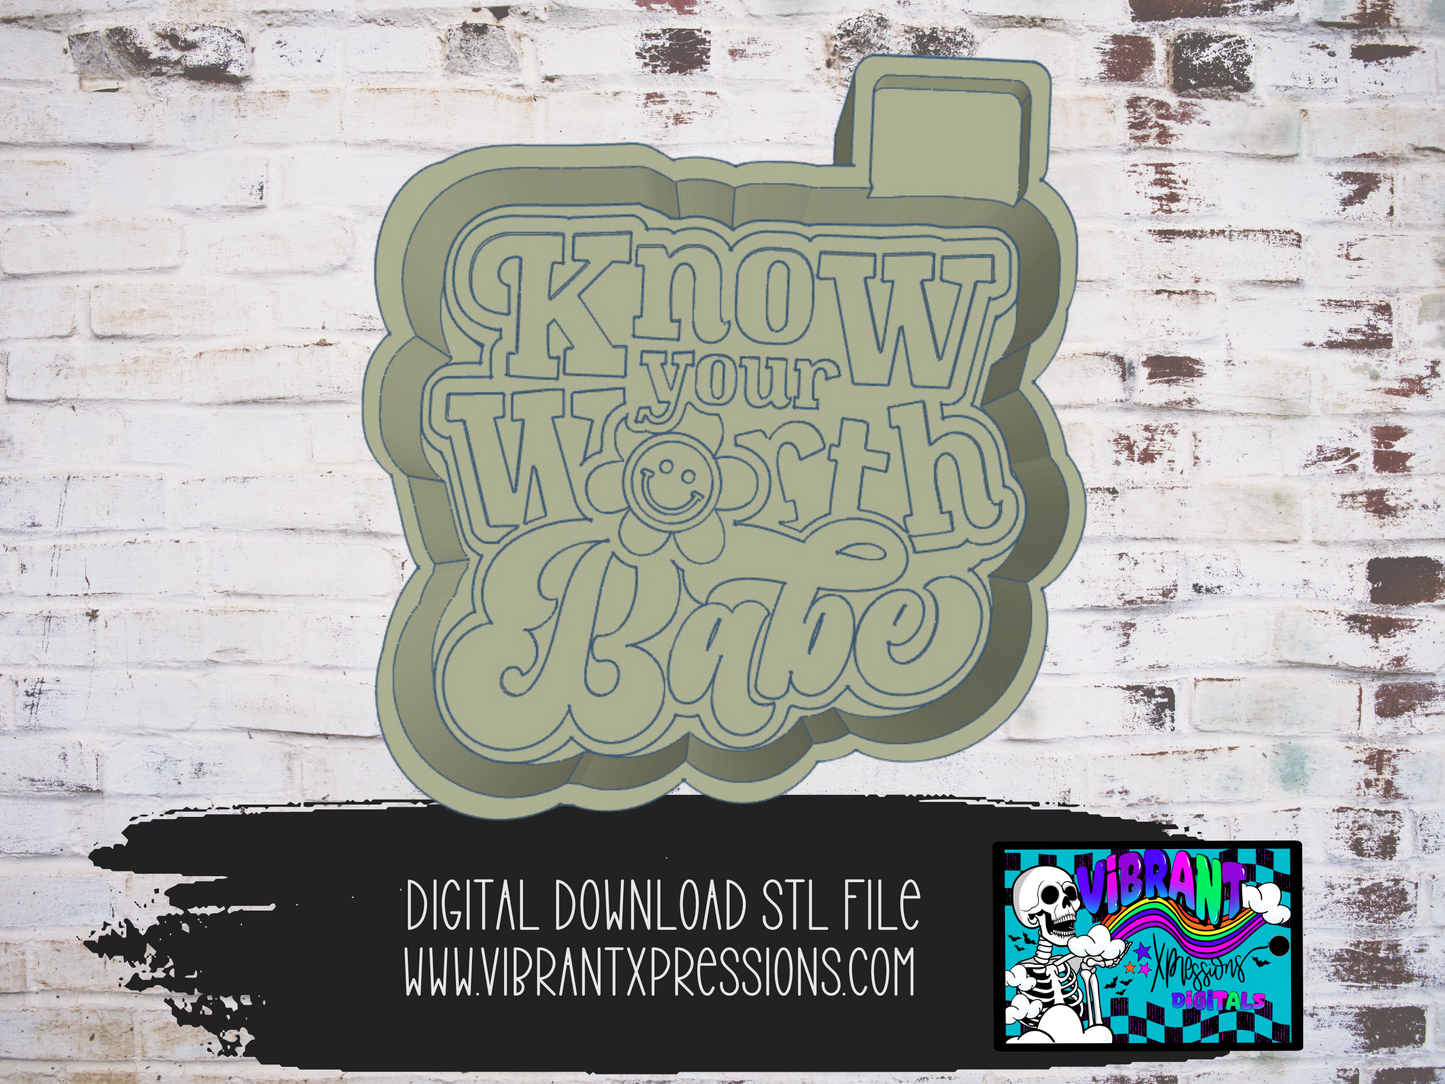 Know Your Worth Babe Mold Maker STL File